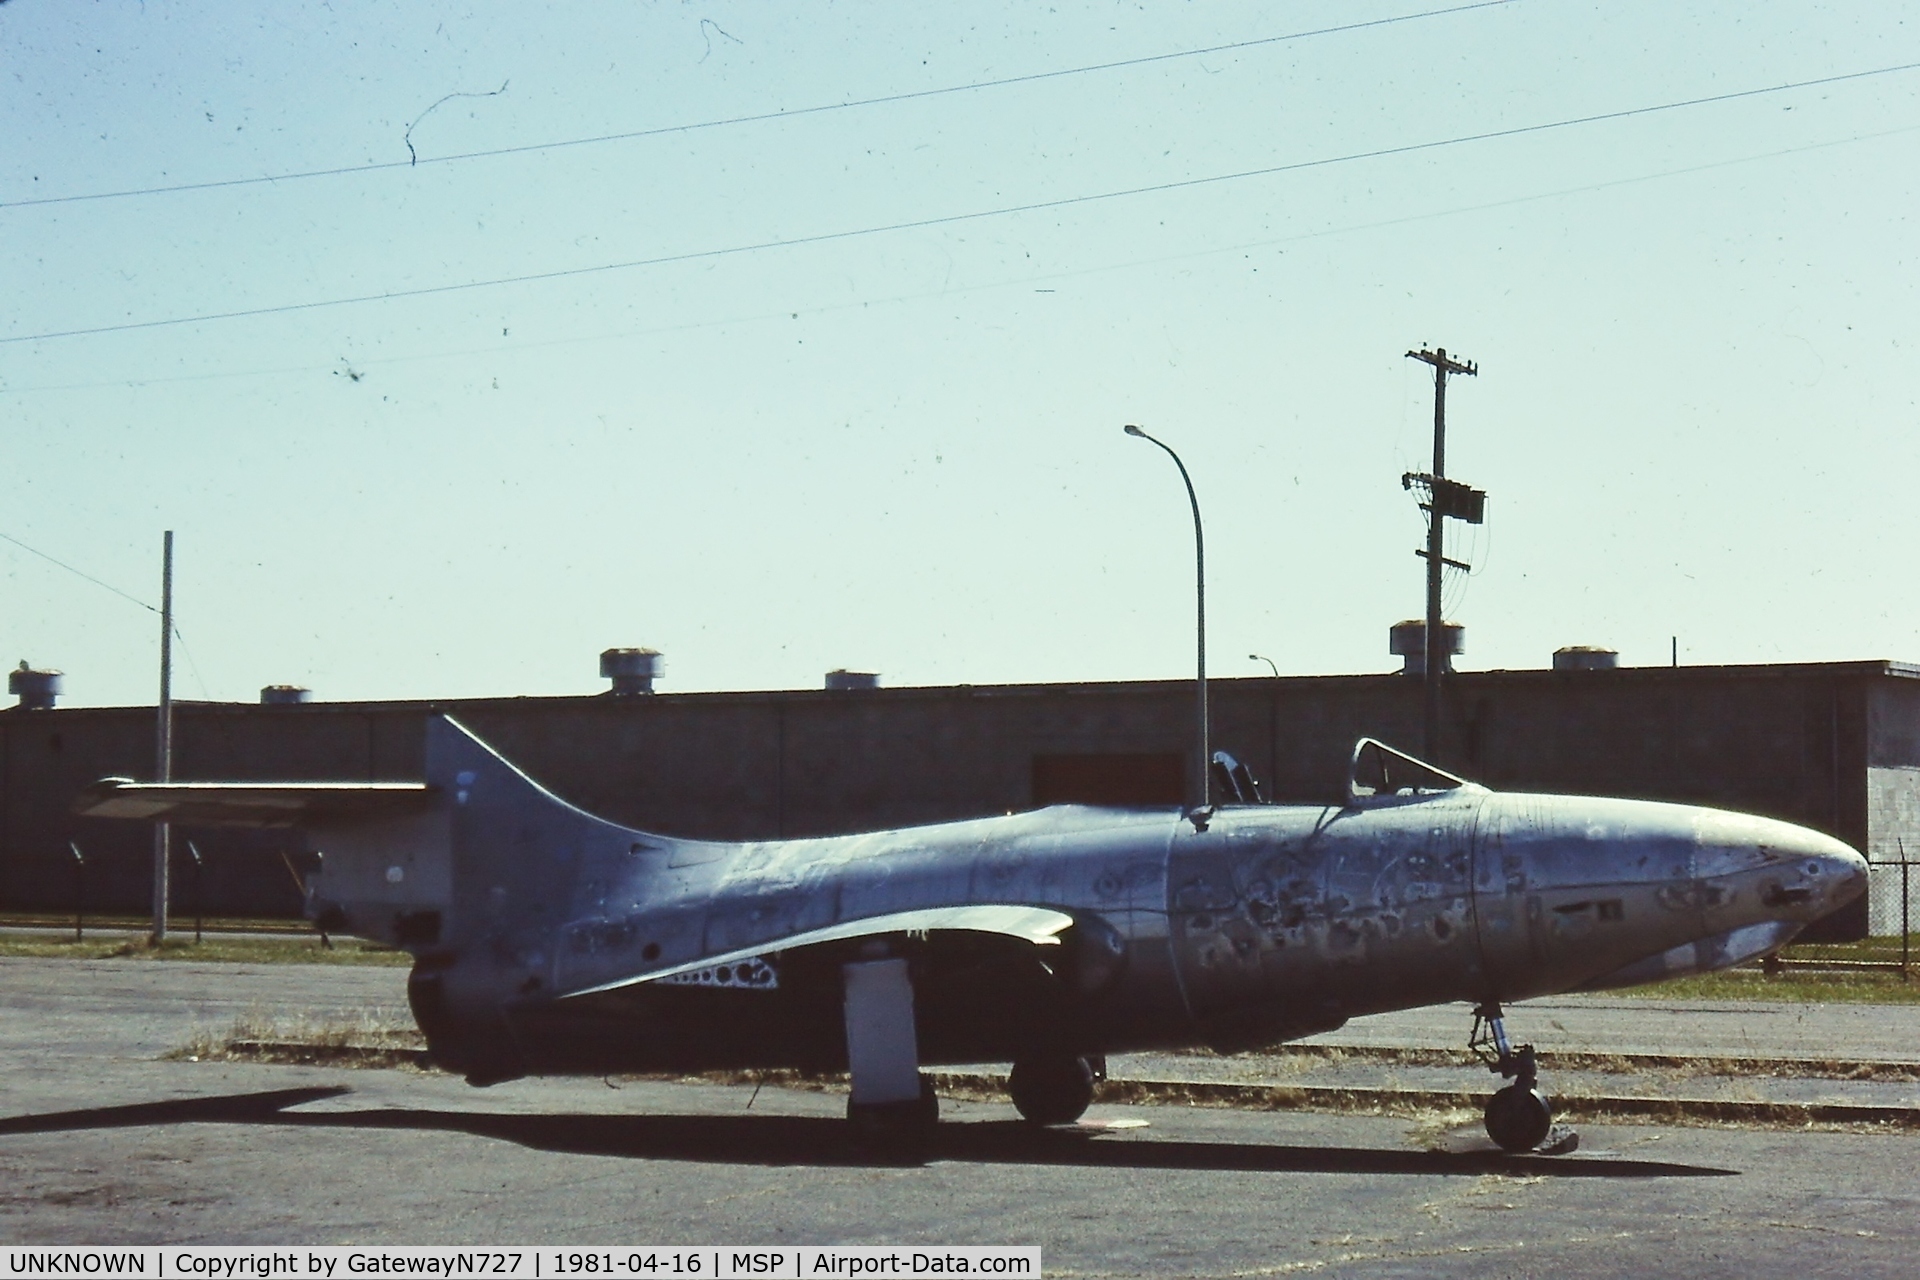 UNKNOWN, Miscellaneous Various C/N unknown, This USN F9F (probably a -4 Panther) sat derelict in a parking lot not far from the MSP control tower until the mid-80s. The F9Fs were @ MSP NAS until 3 crashes around 1956 forced their removal.